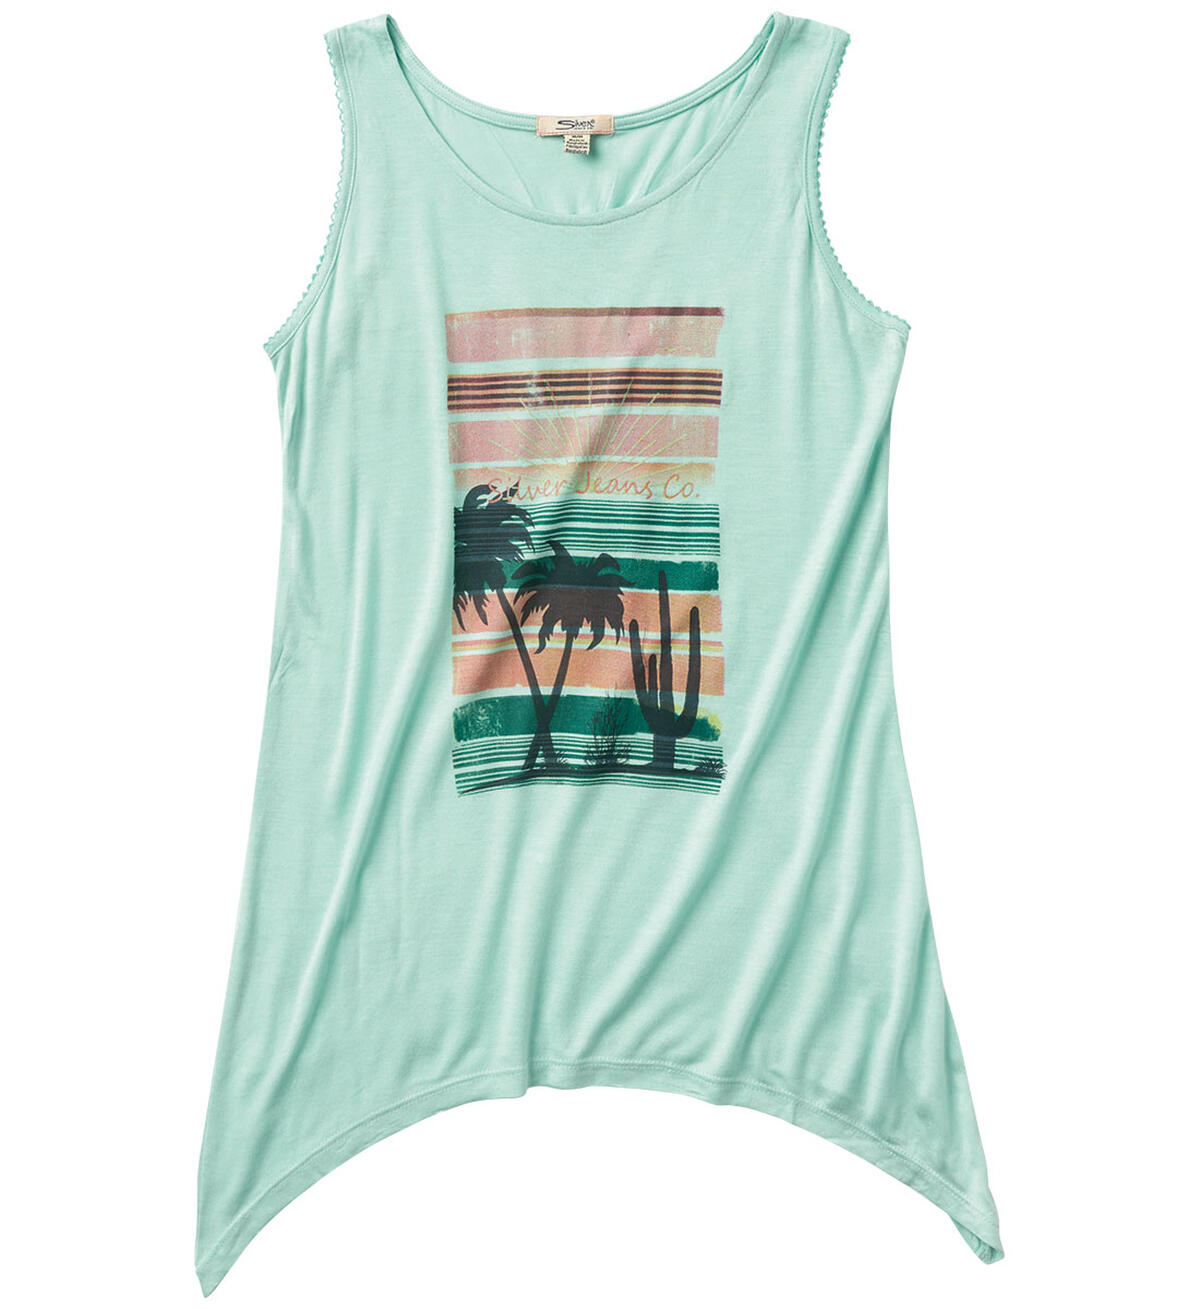 Asymmetric Graphic Tank Top (4-7), , hi-res image number 0}